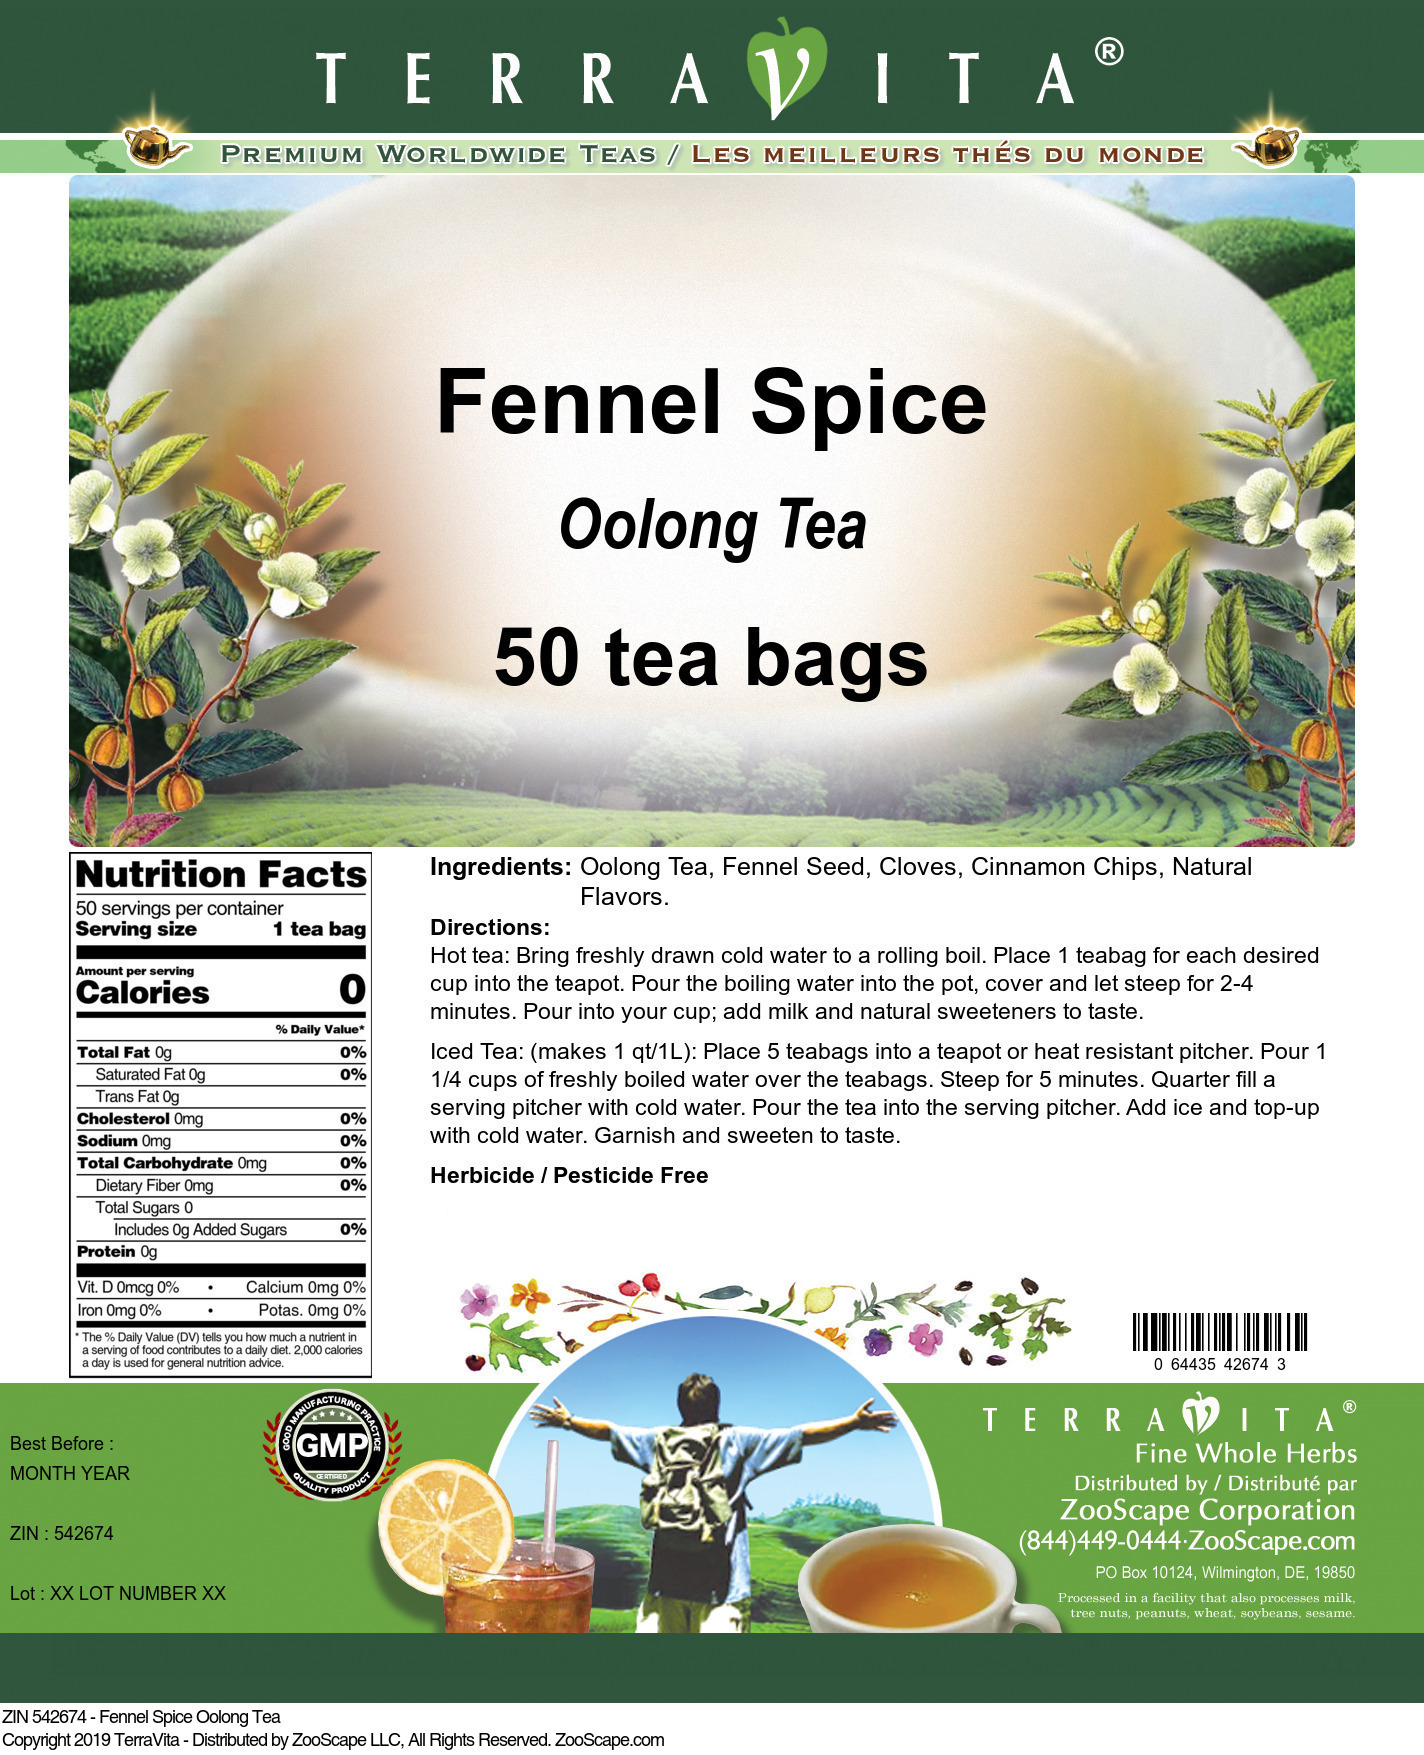 Fennel Spice Oolong Tea - Label